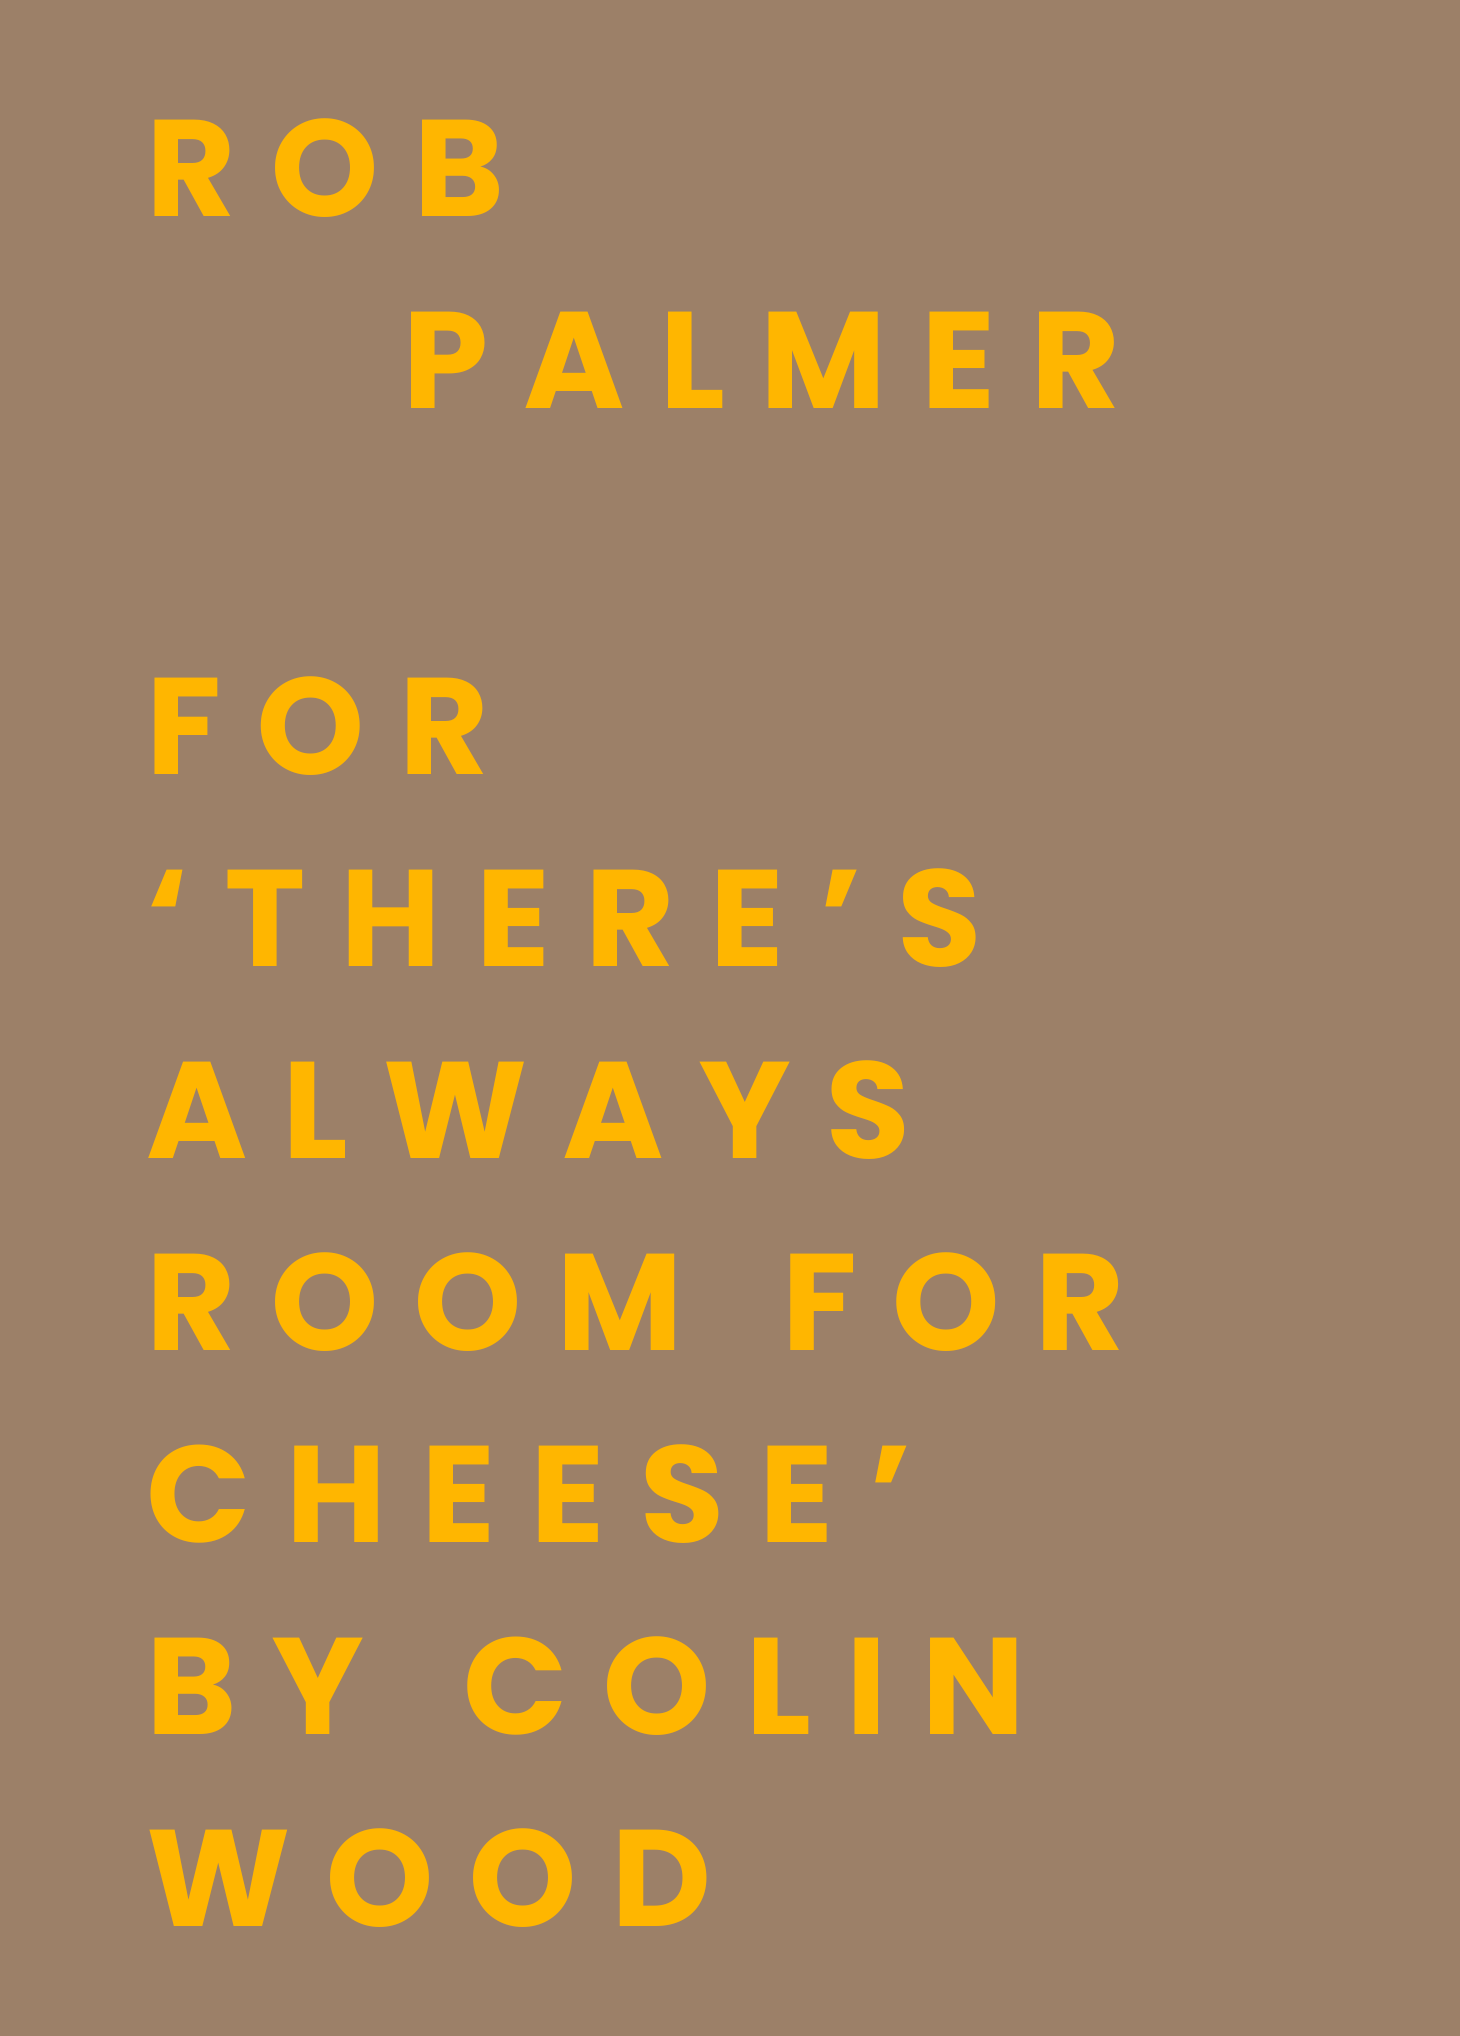 Rob Palmer for ‘There’s always room for cheese’ by Colin Wood